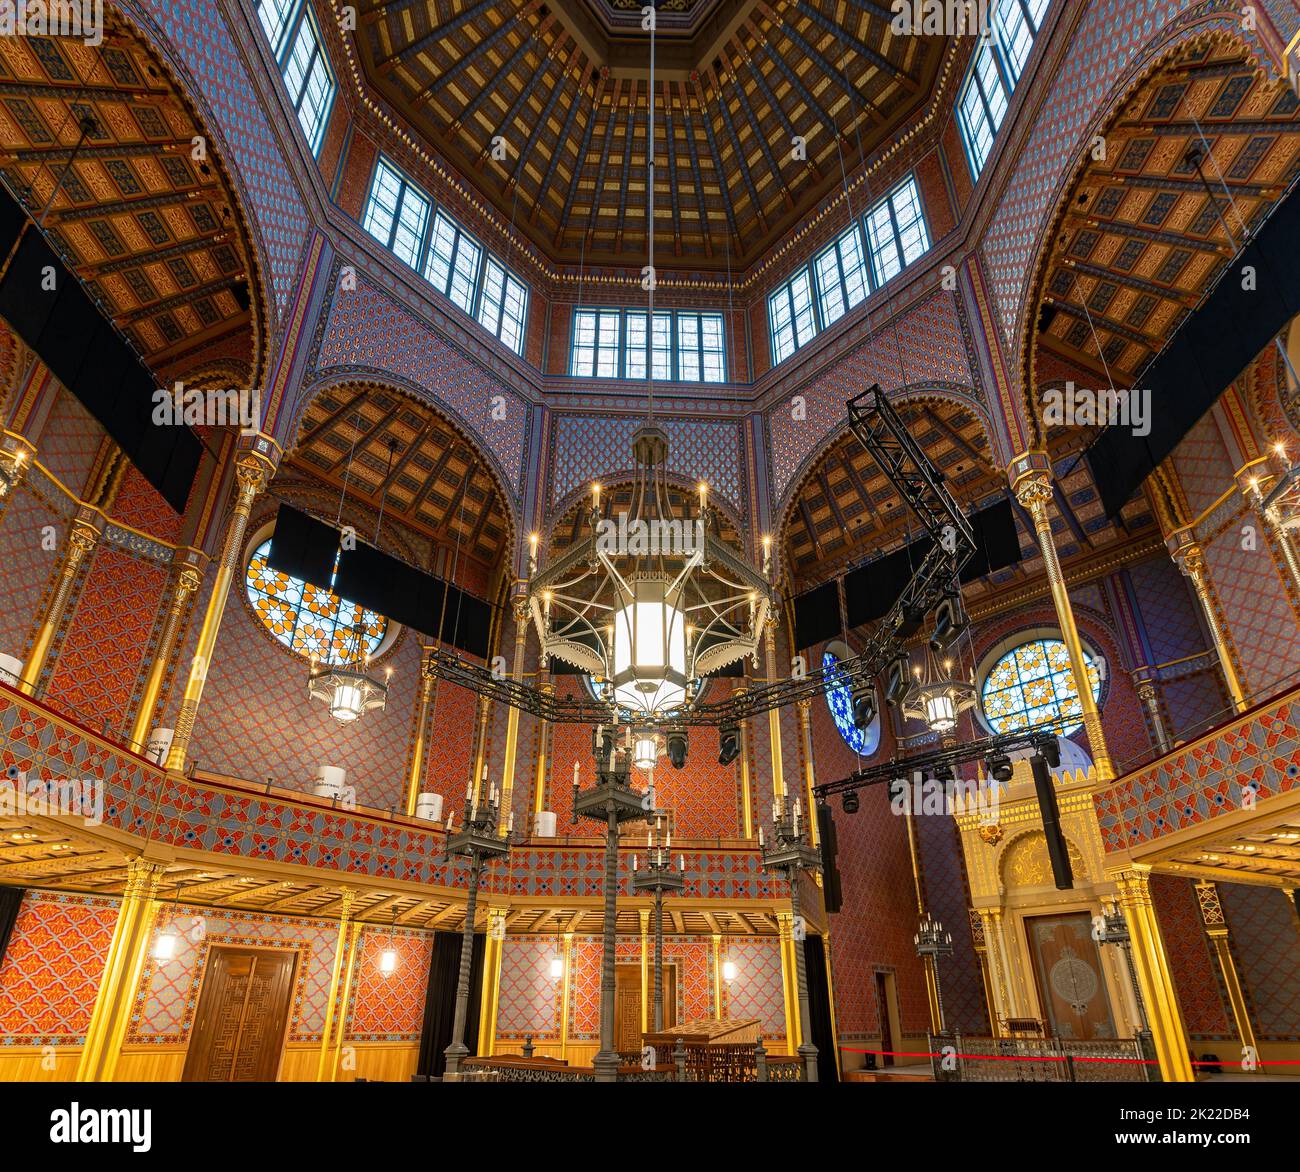 Interior of Rumbach sebestyen Street Synagogue. Near by   the famous Dohany street synagogue. amazing renewef space. Built in 1870-73. designed the ar Stock Photo